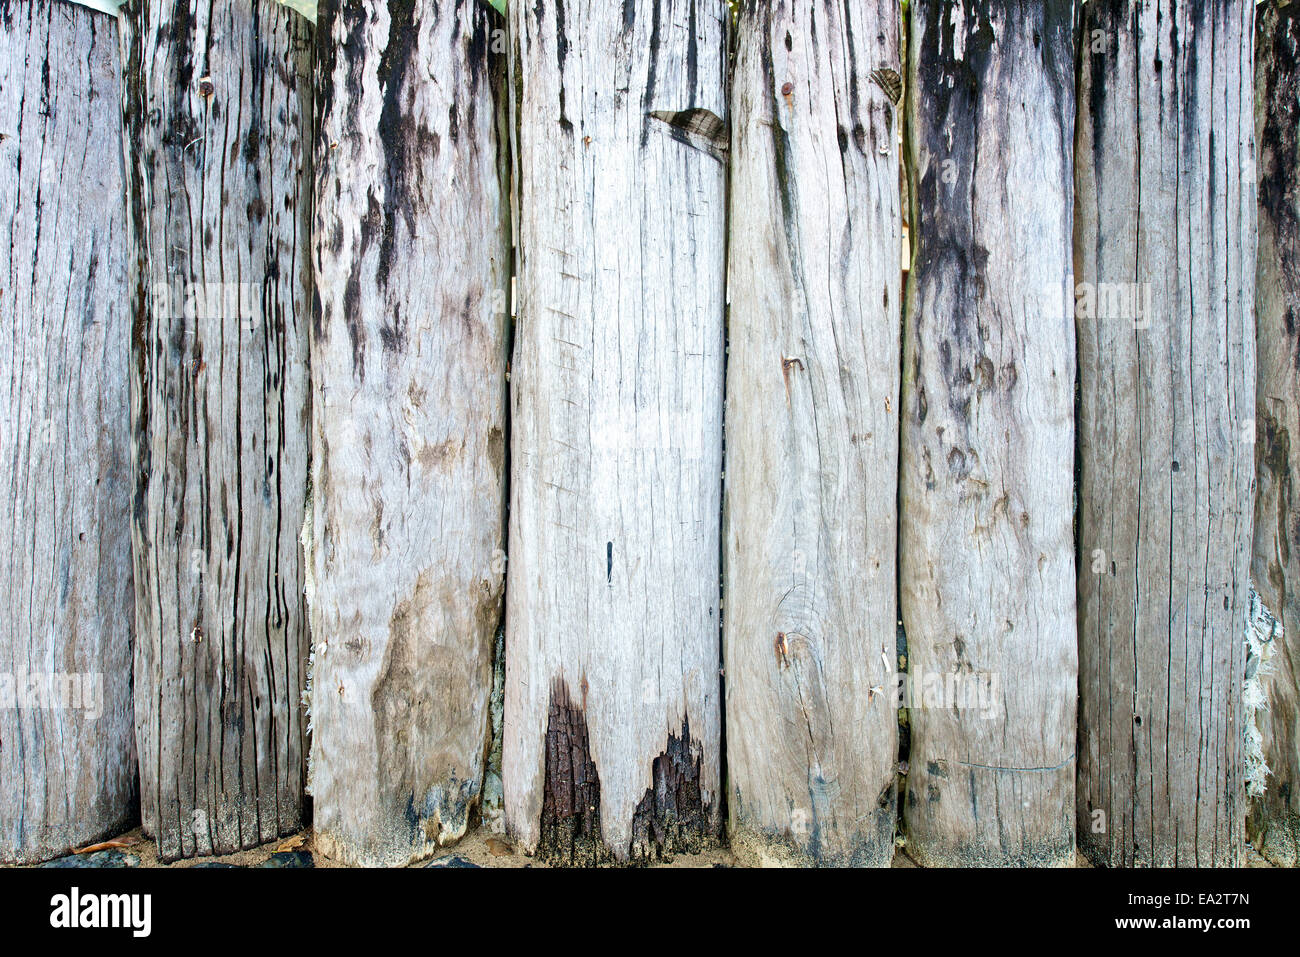 Natural Wood Panel texture as pattern background Stock Photo